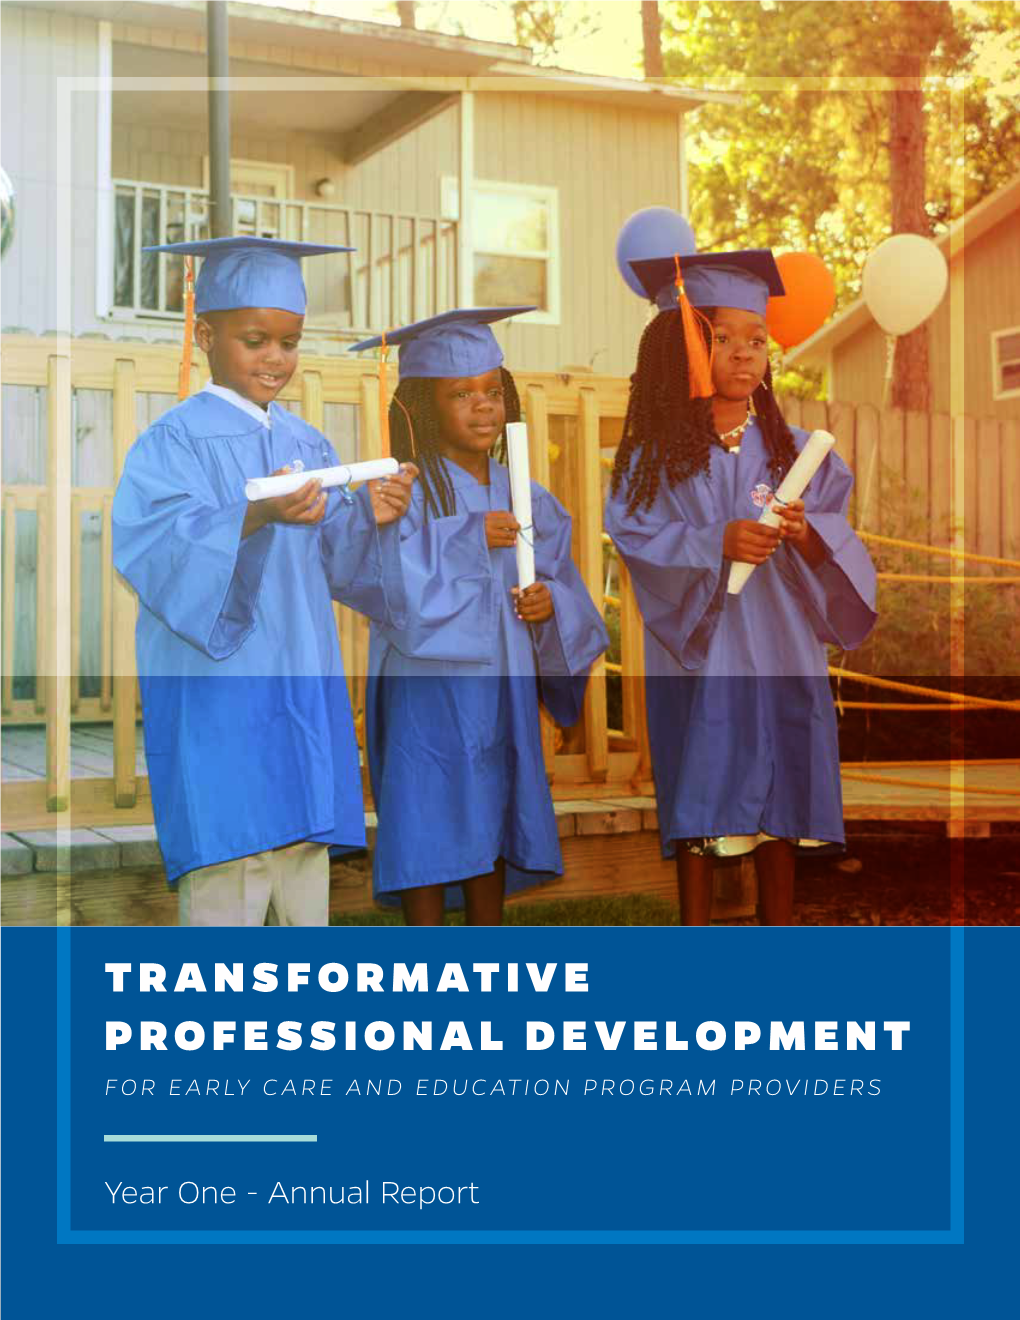 Transformative Professional Development for Early Care and Education Program Providers